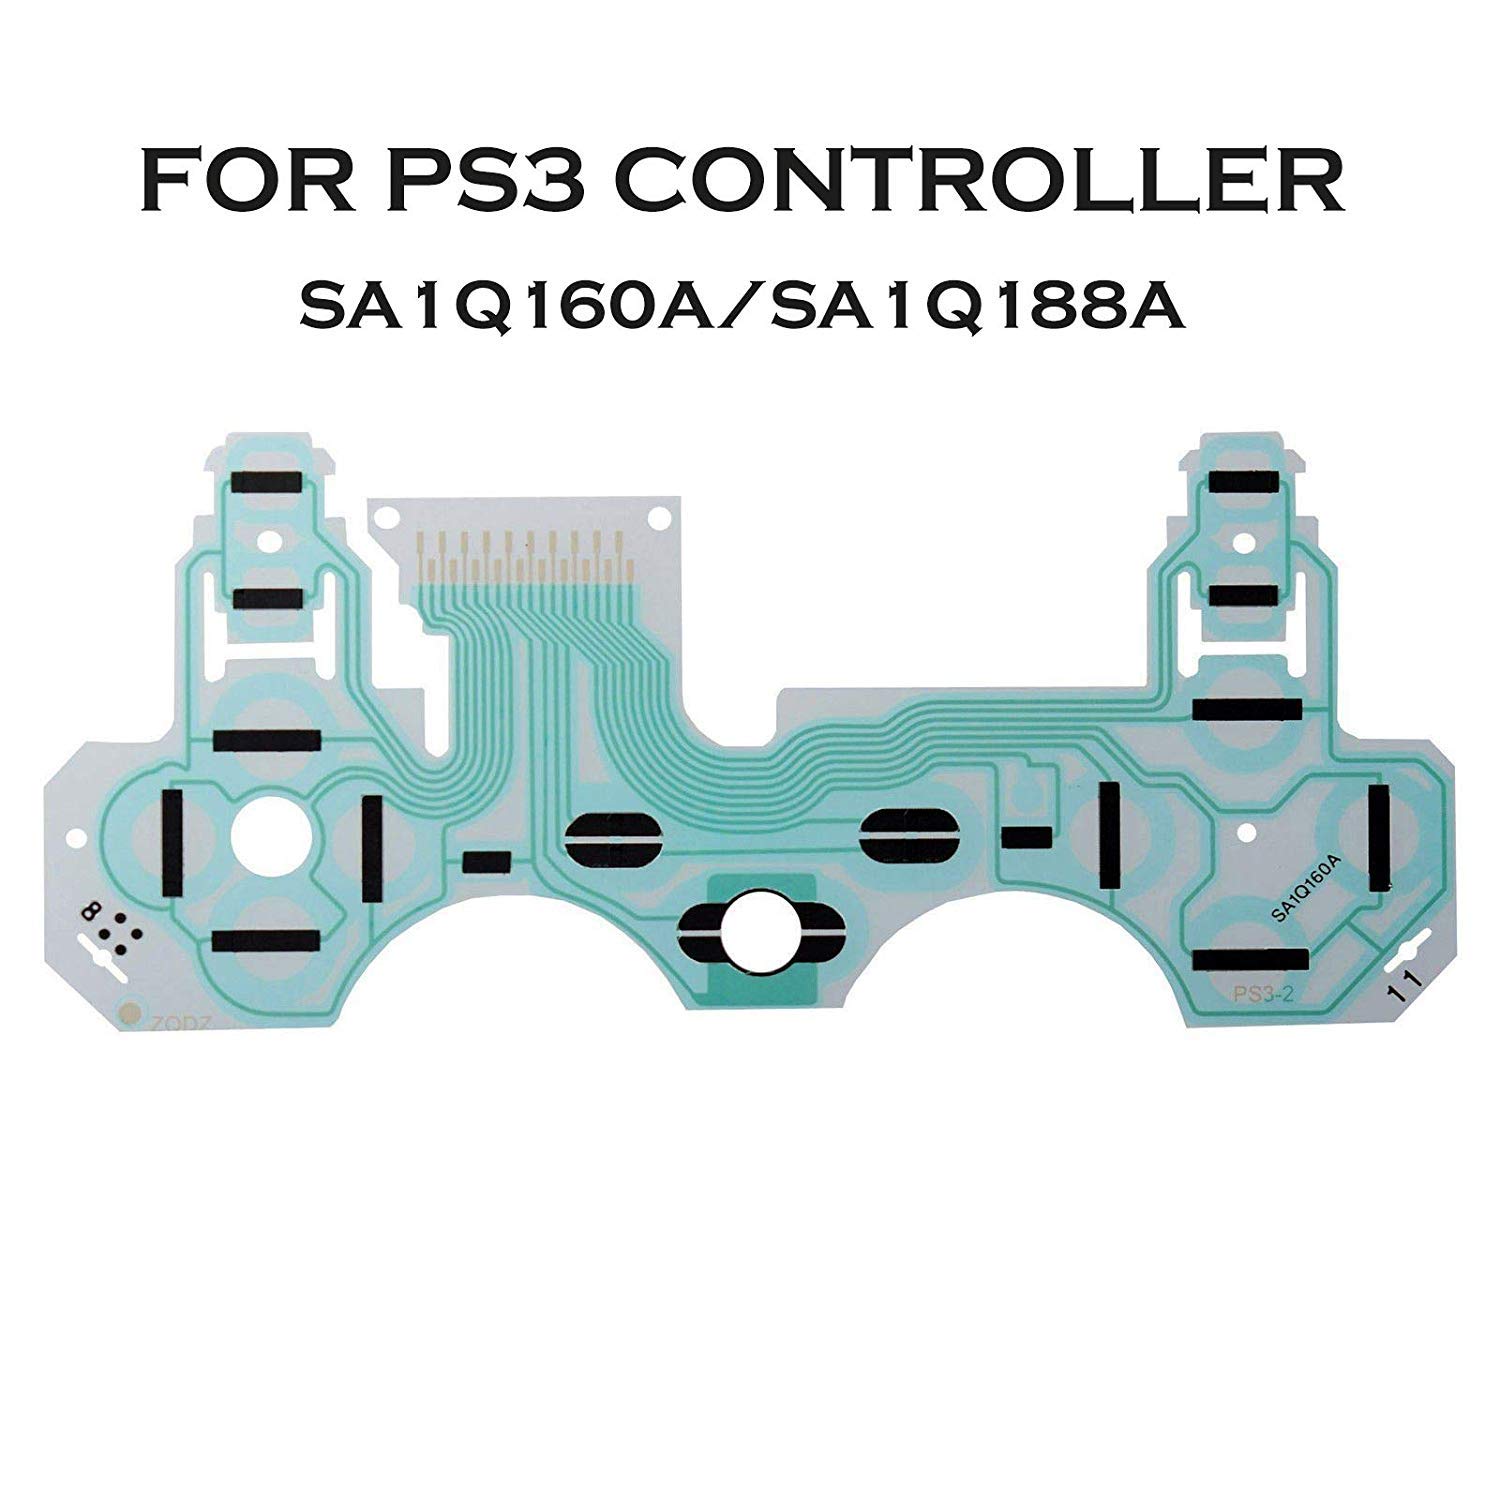 Replacement Board Button Ribbon Cable Conductive Film Sheet for PS3 Wireless Controller - SA1Q160A/SA1Q188A [video game]